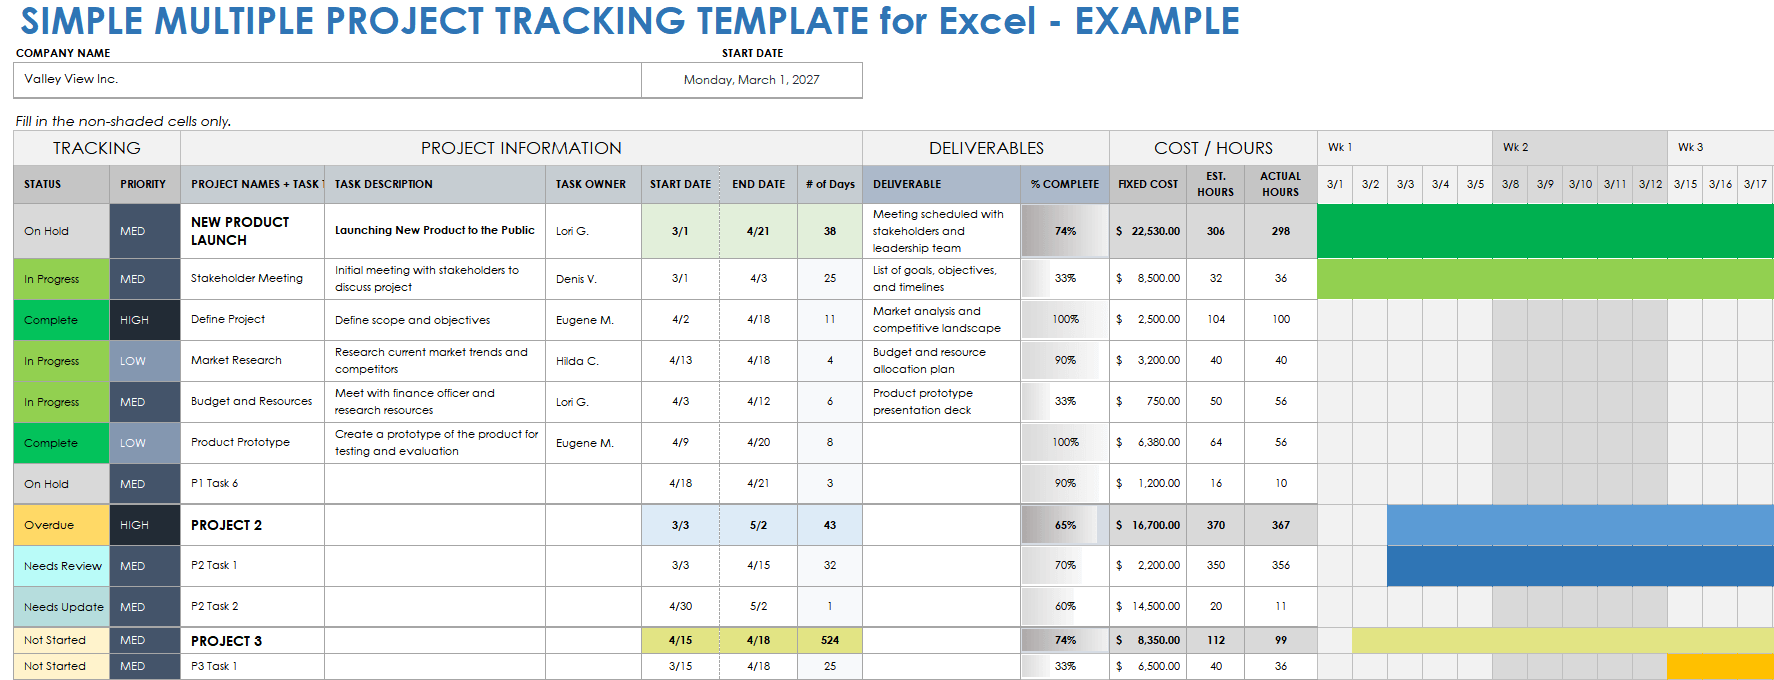 Simple Multiple Project Tracking Template for Excel Example